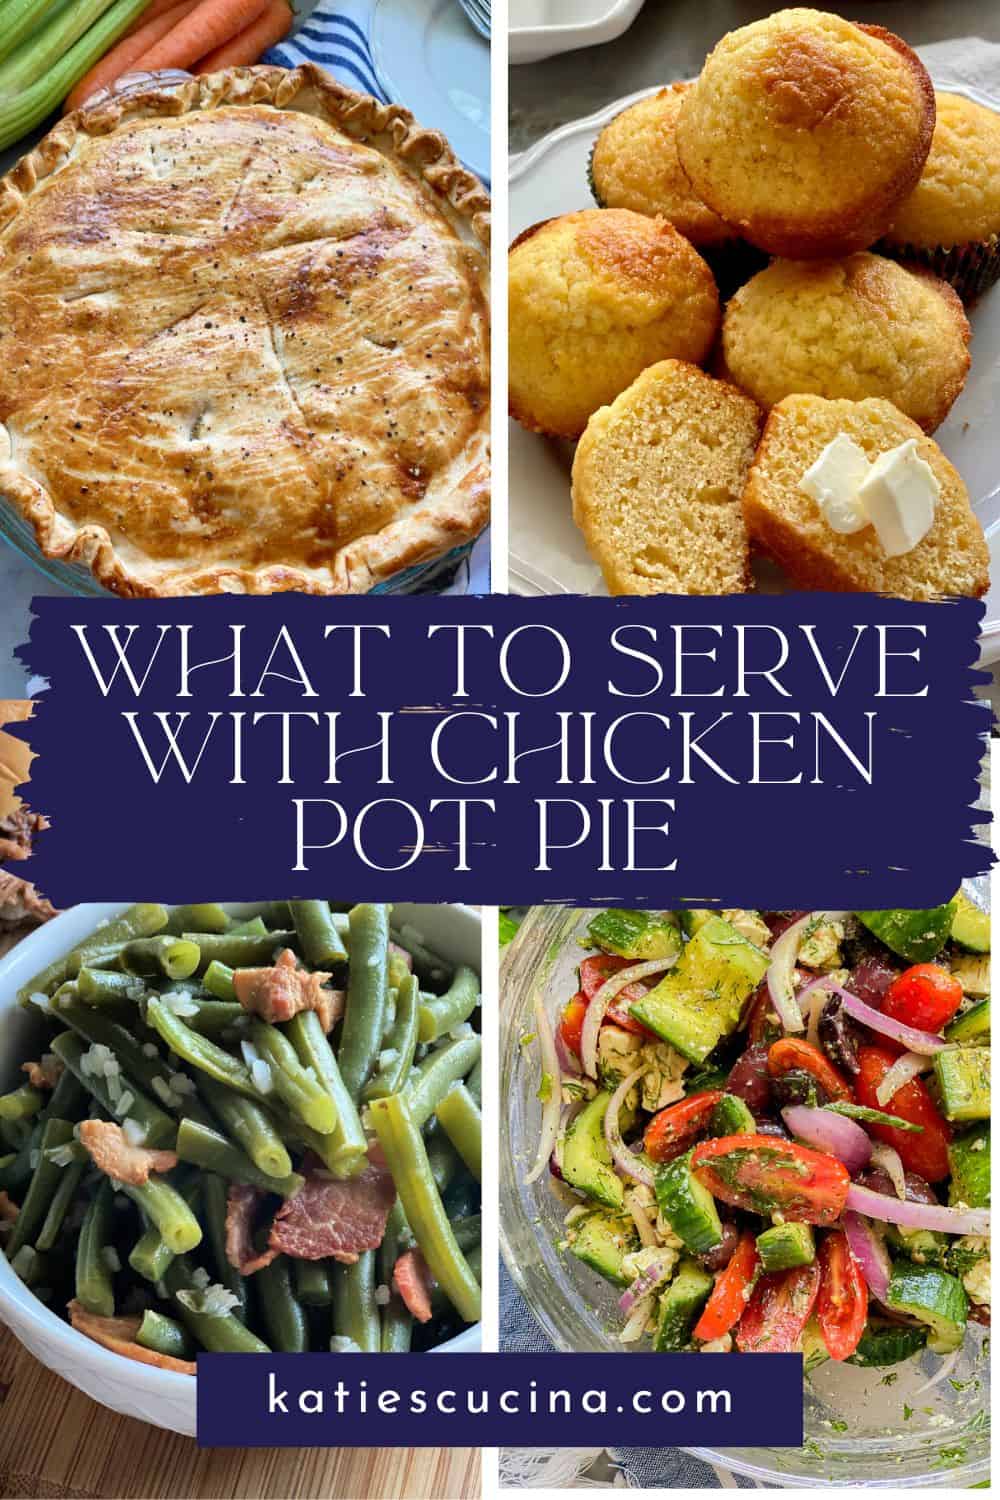 Chicken pot pie, corn bread, green beans, and cucumber tomato salad images with text on image for Pinterest.